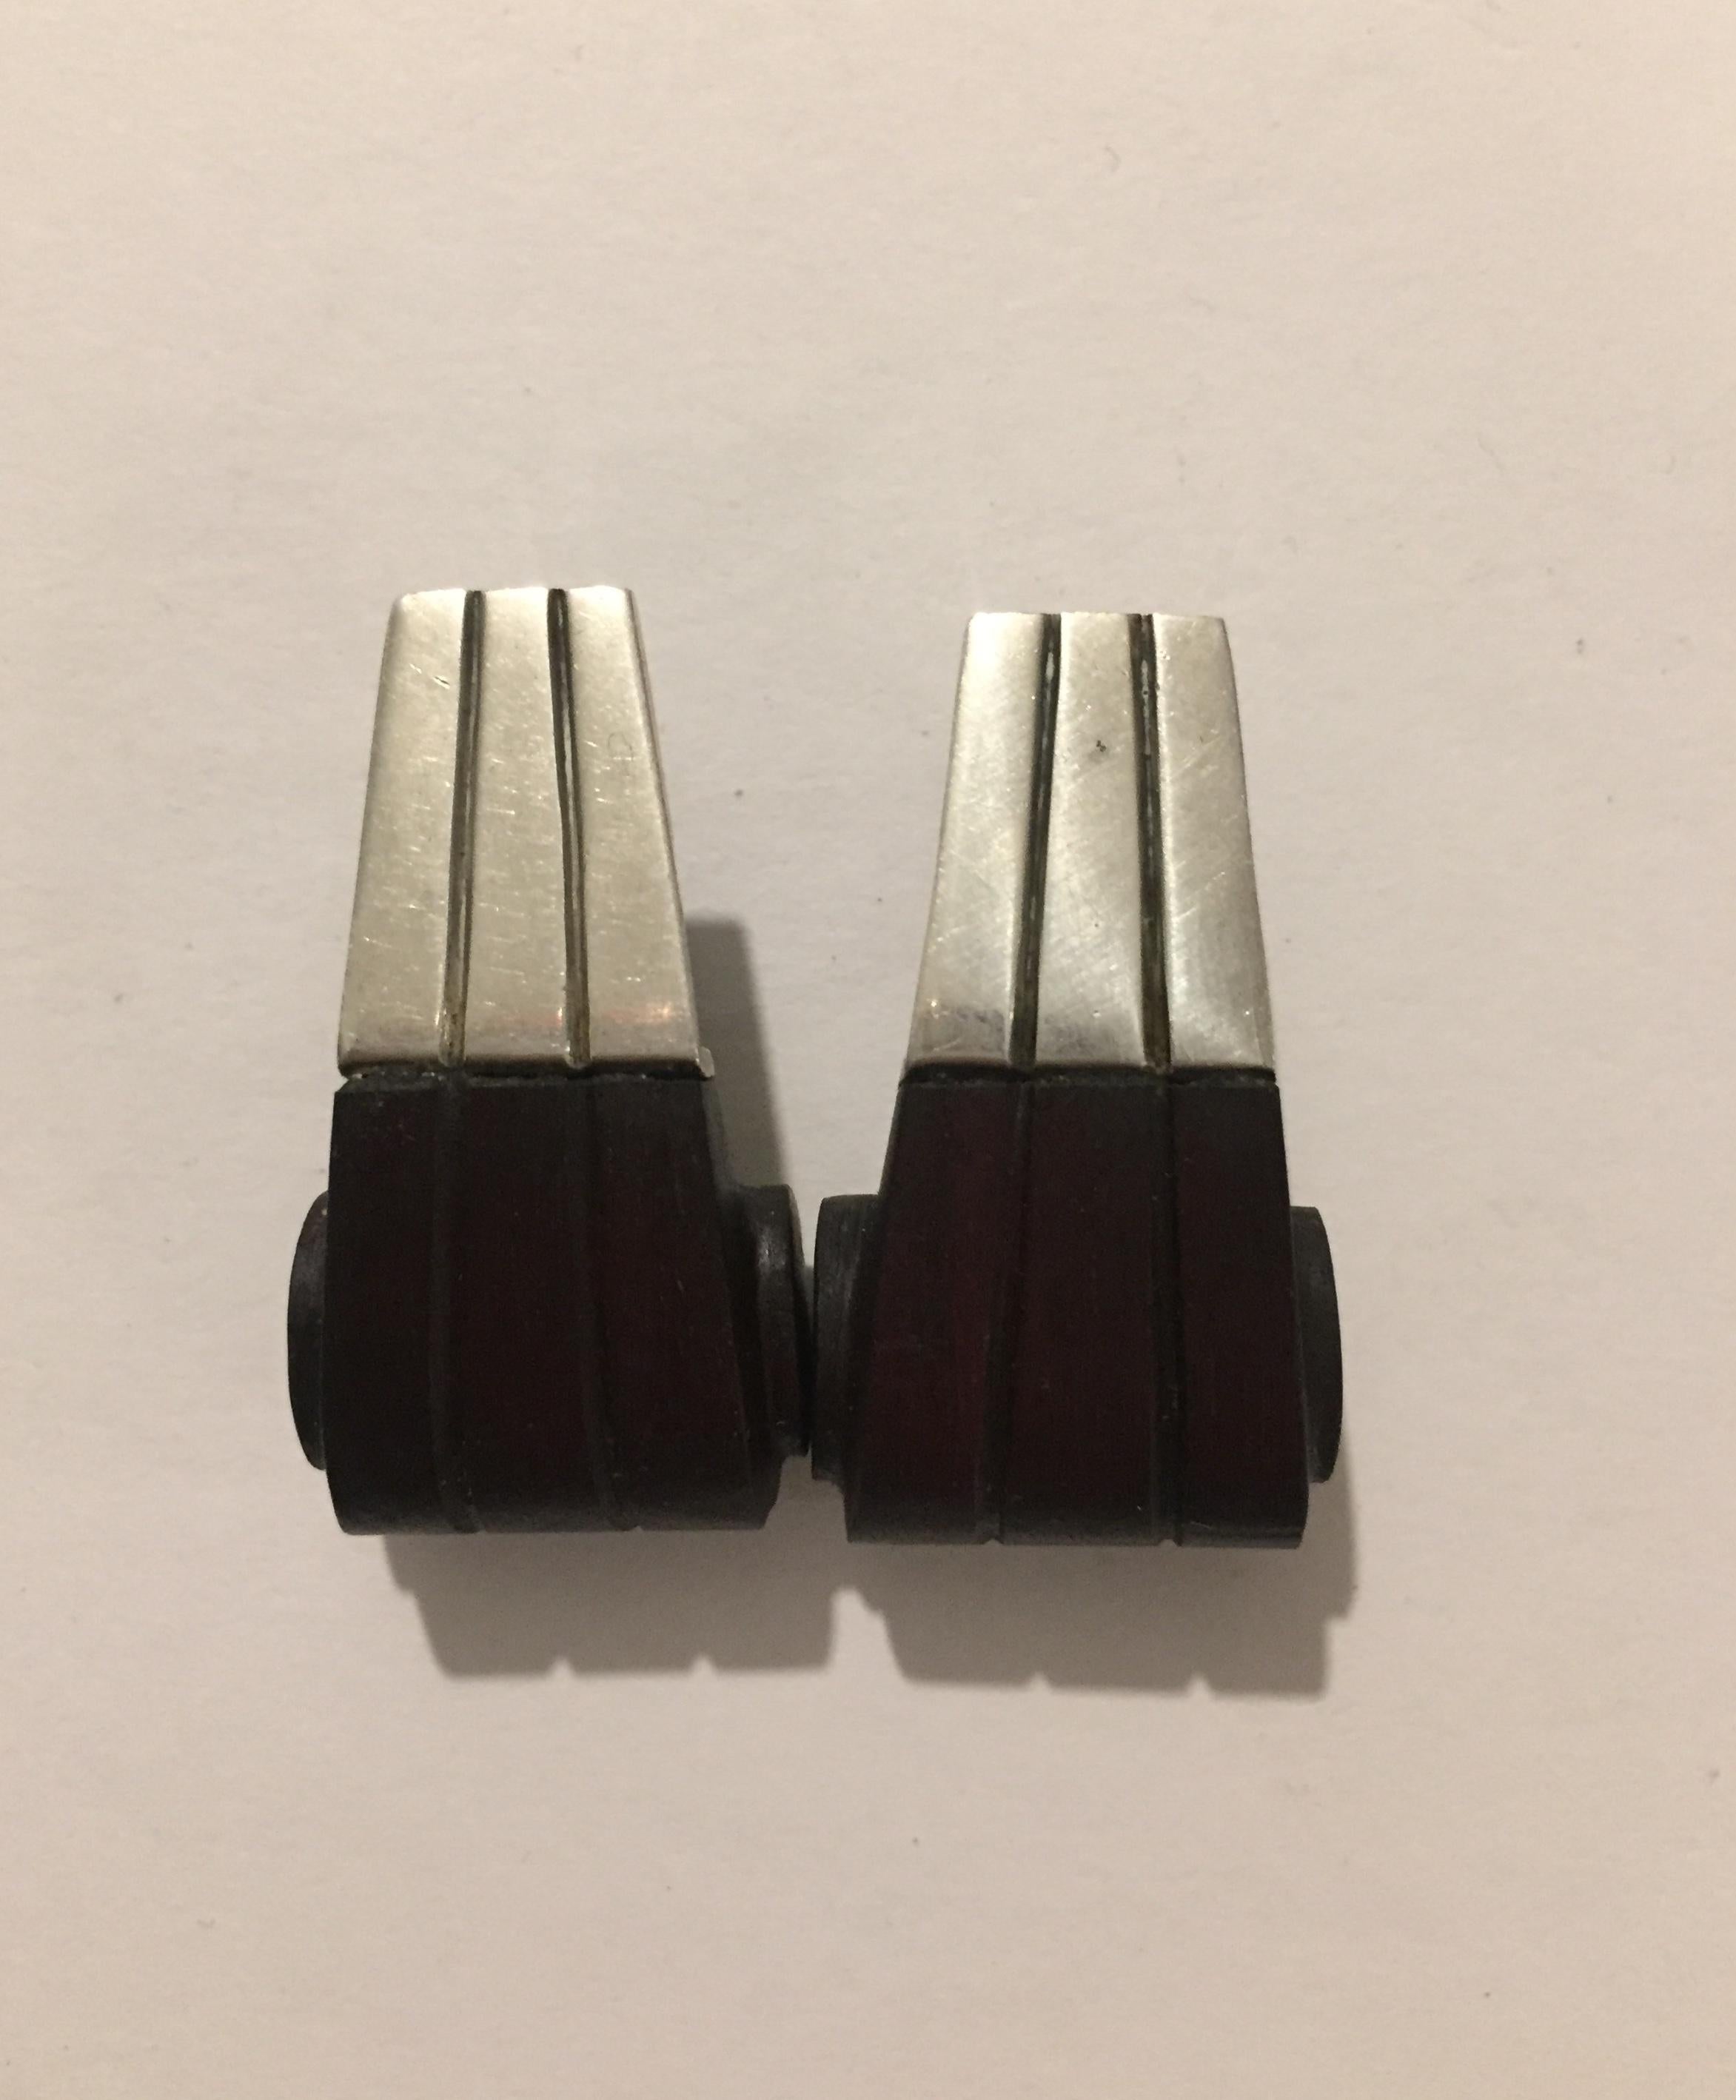 Rare pair of Taxco silver and rosewood earring by American designer William Spratling. The curled design shows striations in both wood and silver. Both earrings sealed on back.

According to Spratling Silver Reference, this earrings are feature in